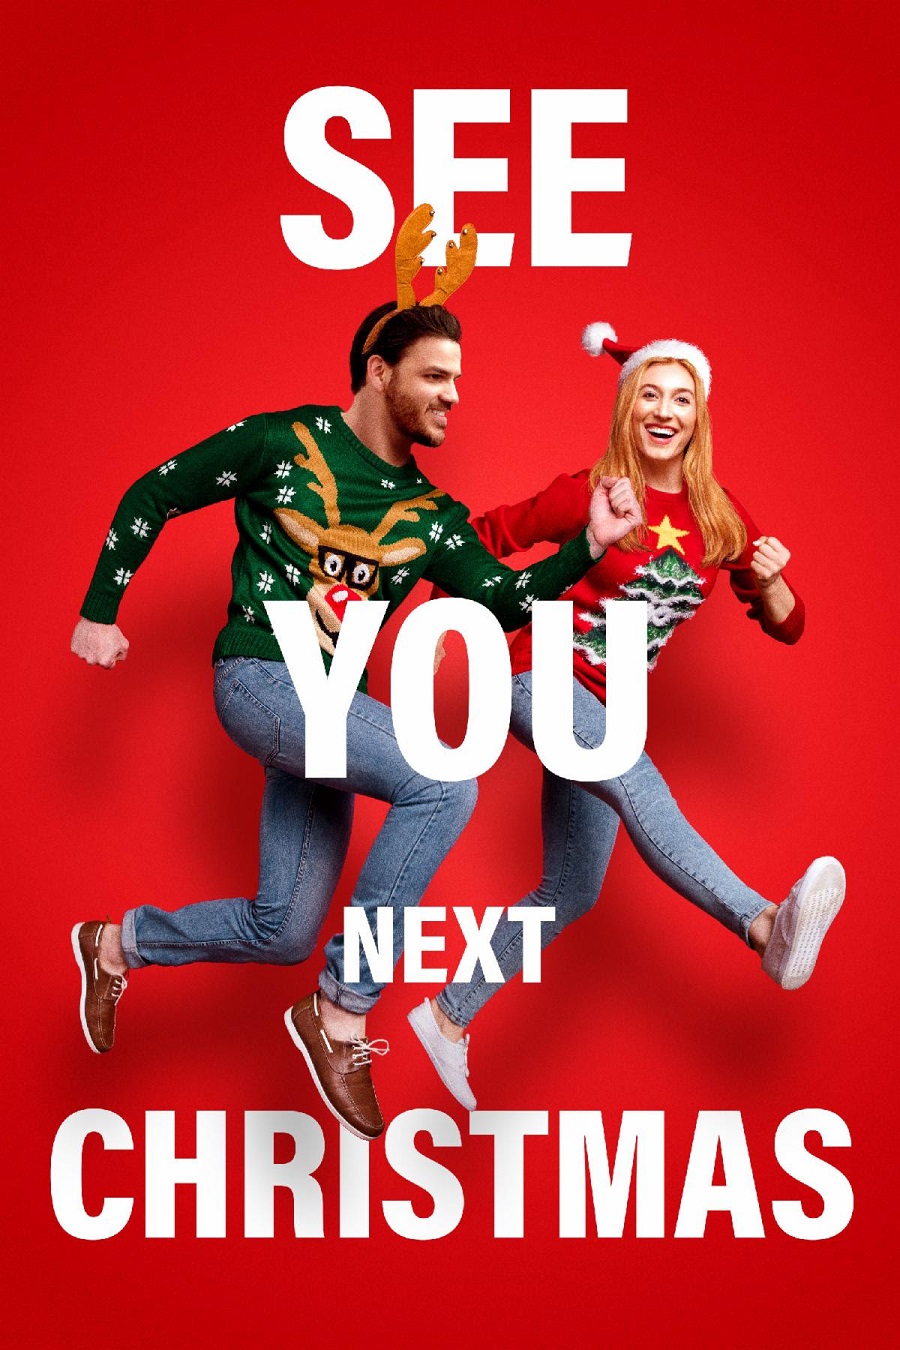 See You Next Christmas movie review poster (Courtesy of Giant Pictures)